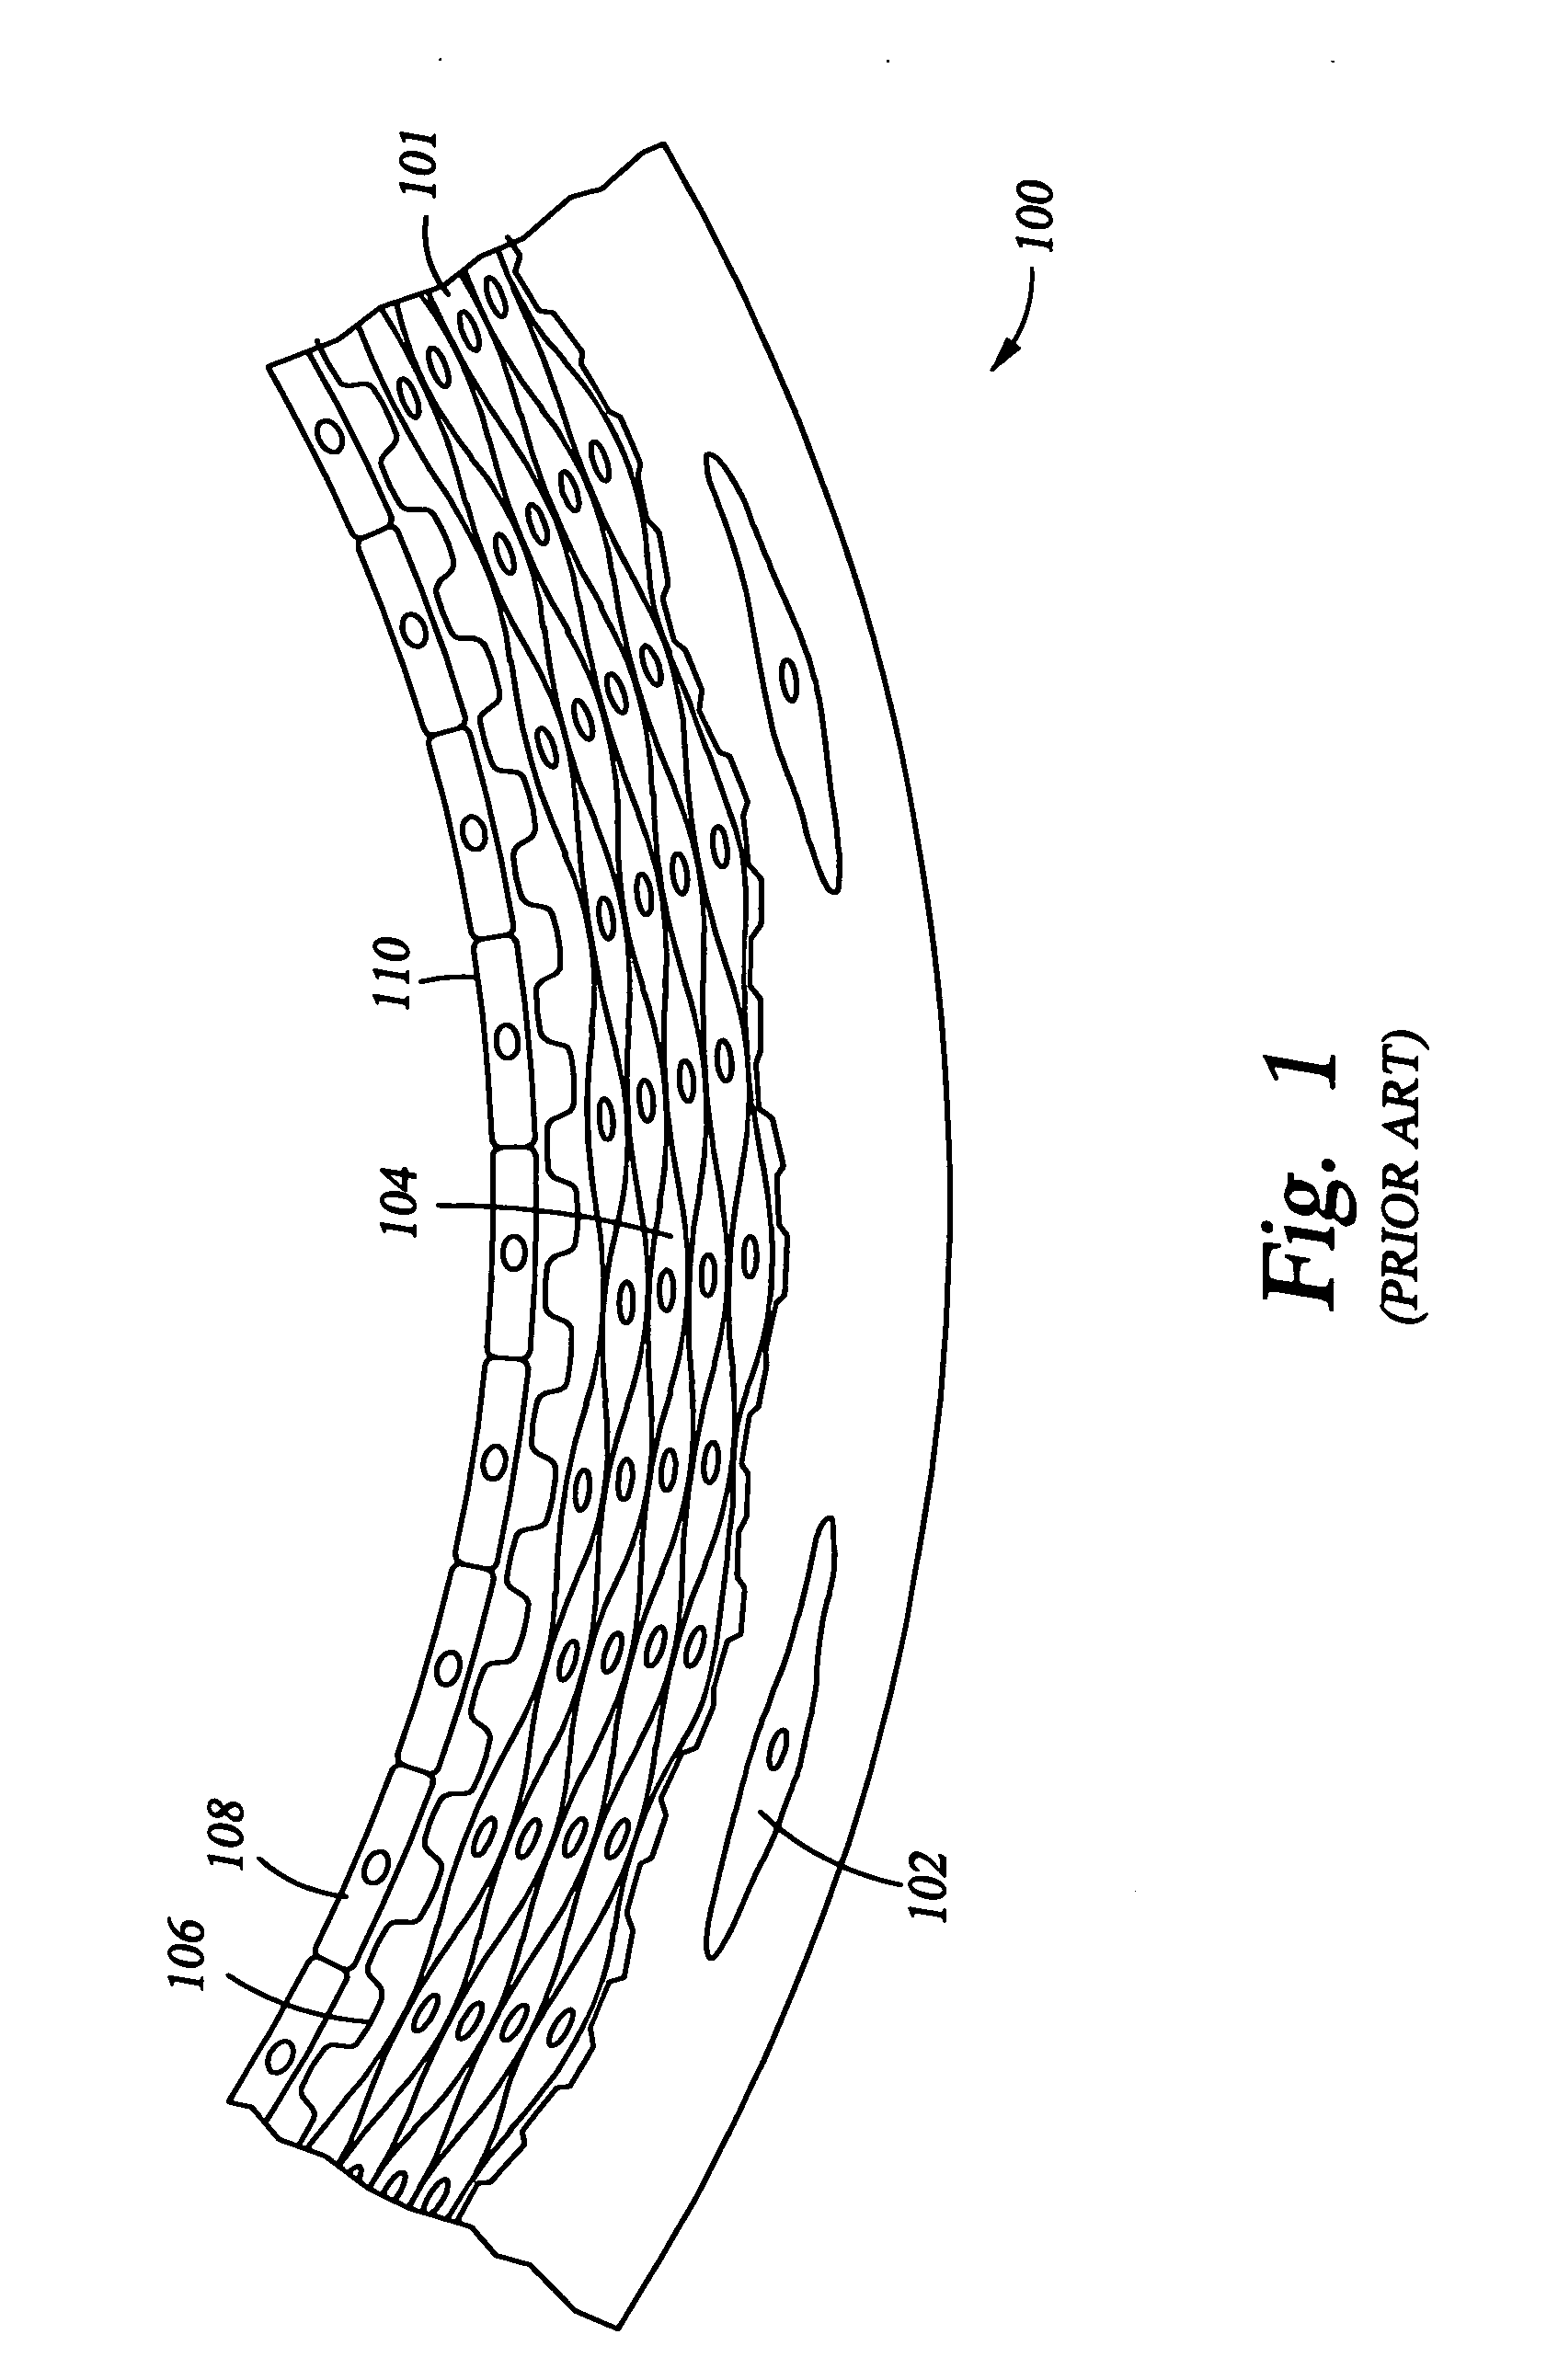 Apparatus and method for improving blood flow in arterioles and capillaries